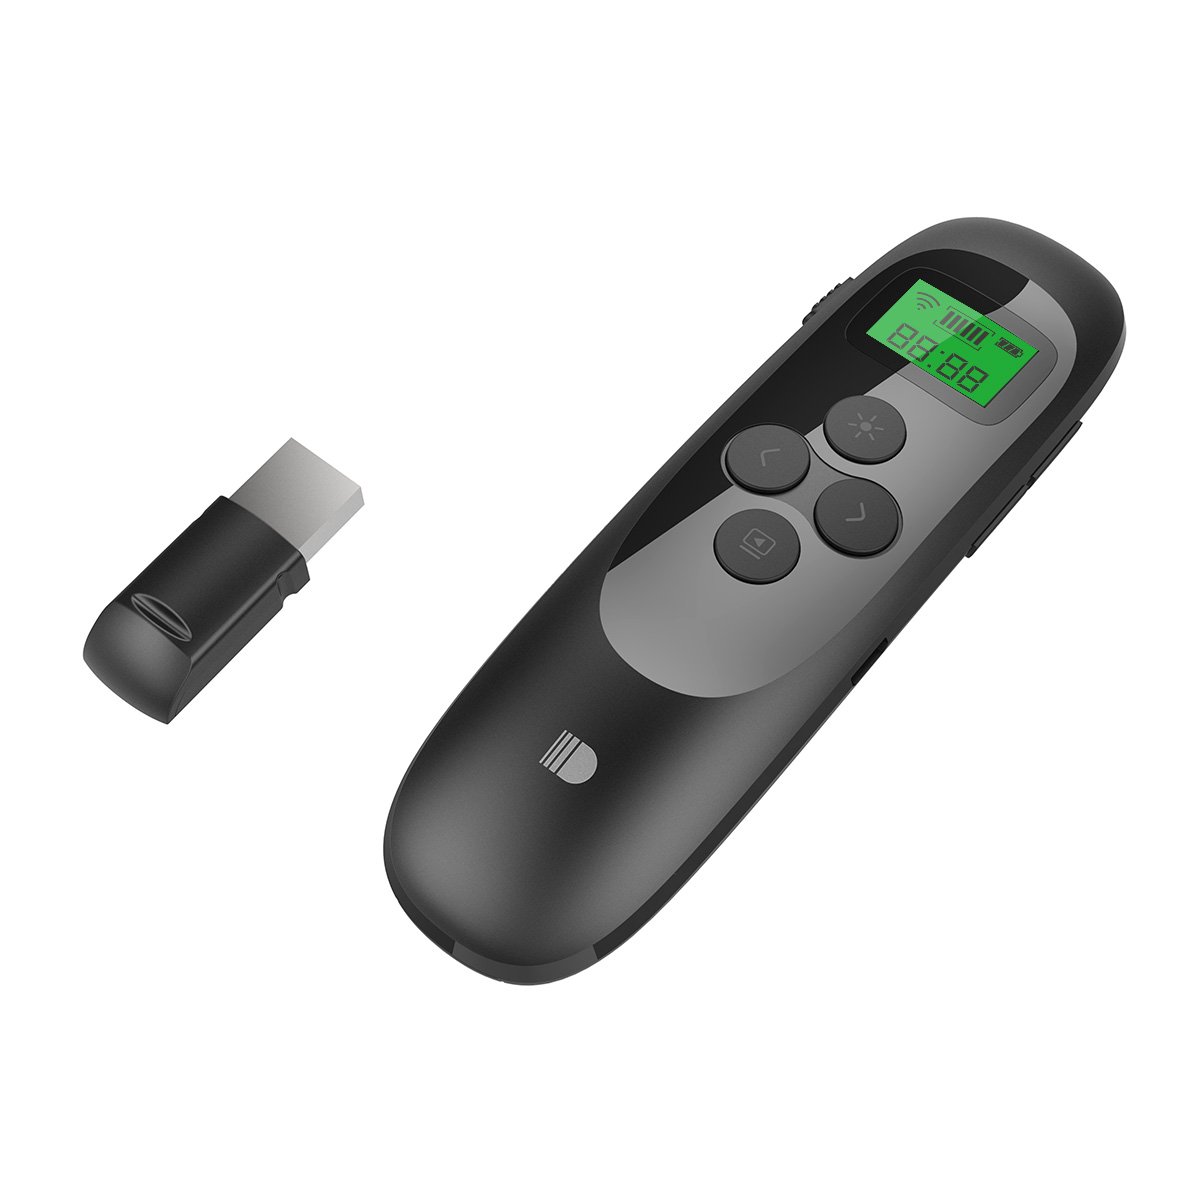 DSIT021---Presentation Remote, Doosl Rechargeable Wireless Presenter with LCD Display, 2.4GHz Wireless USB Powerpoint PPT Clicker Remote Control (Black)